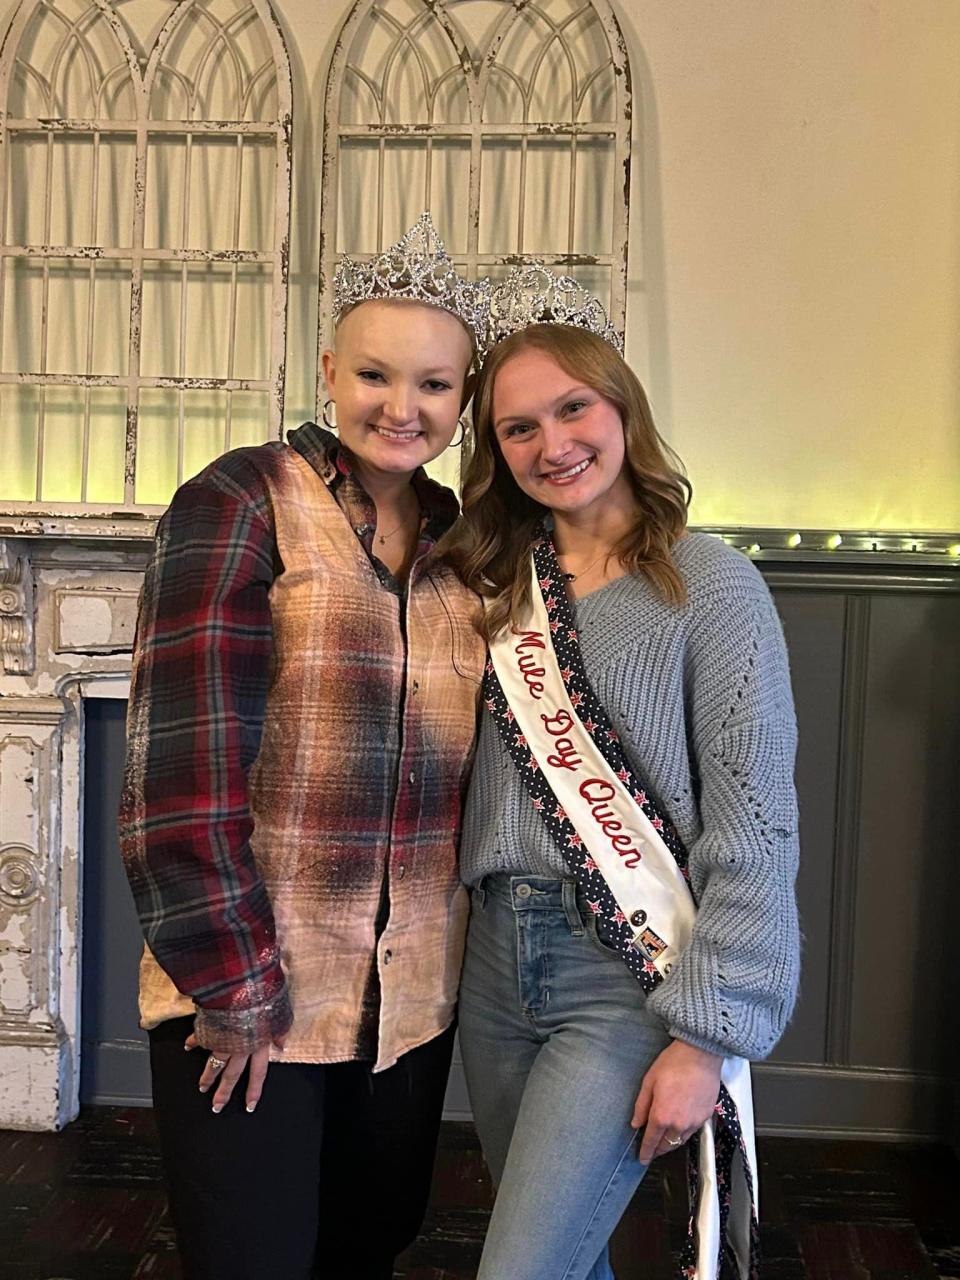 Carly McGee, left, will join this year's Mule Day Queen Anissa Grimes as the festival's first honorary queen.